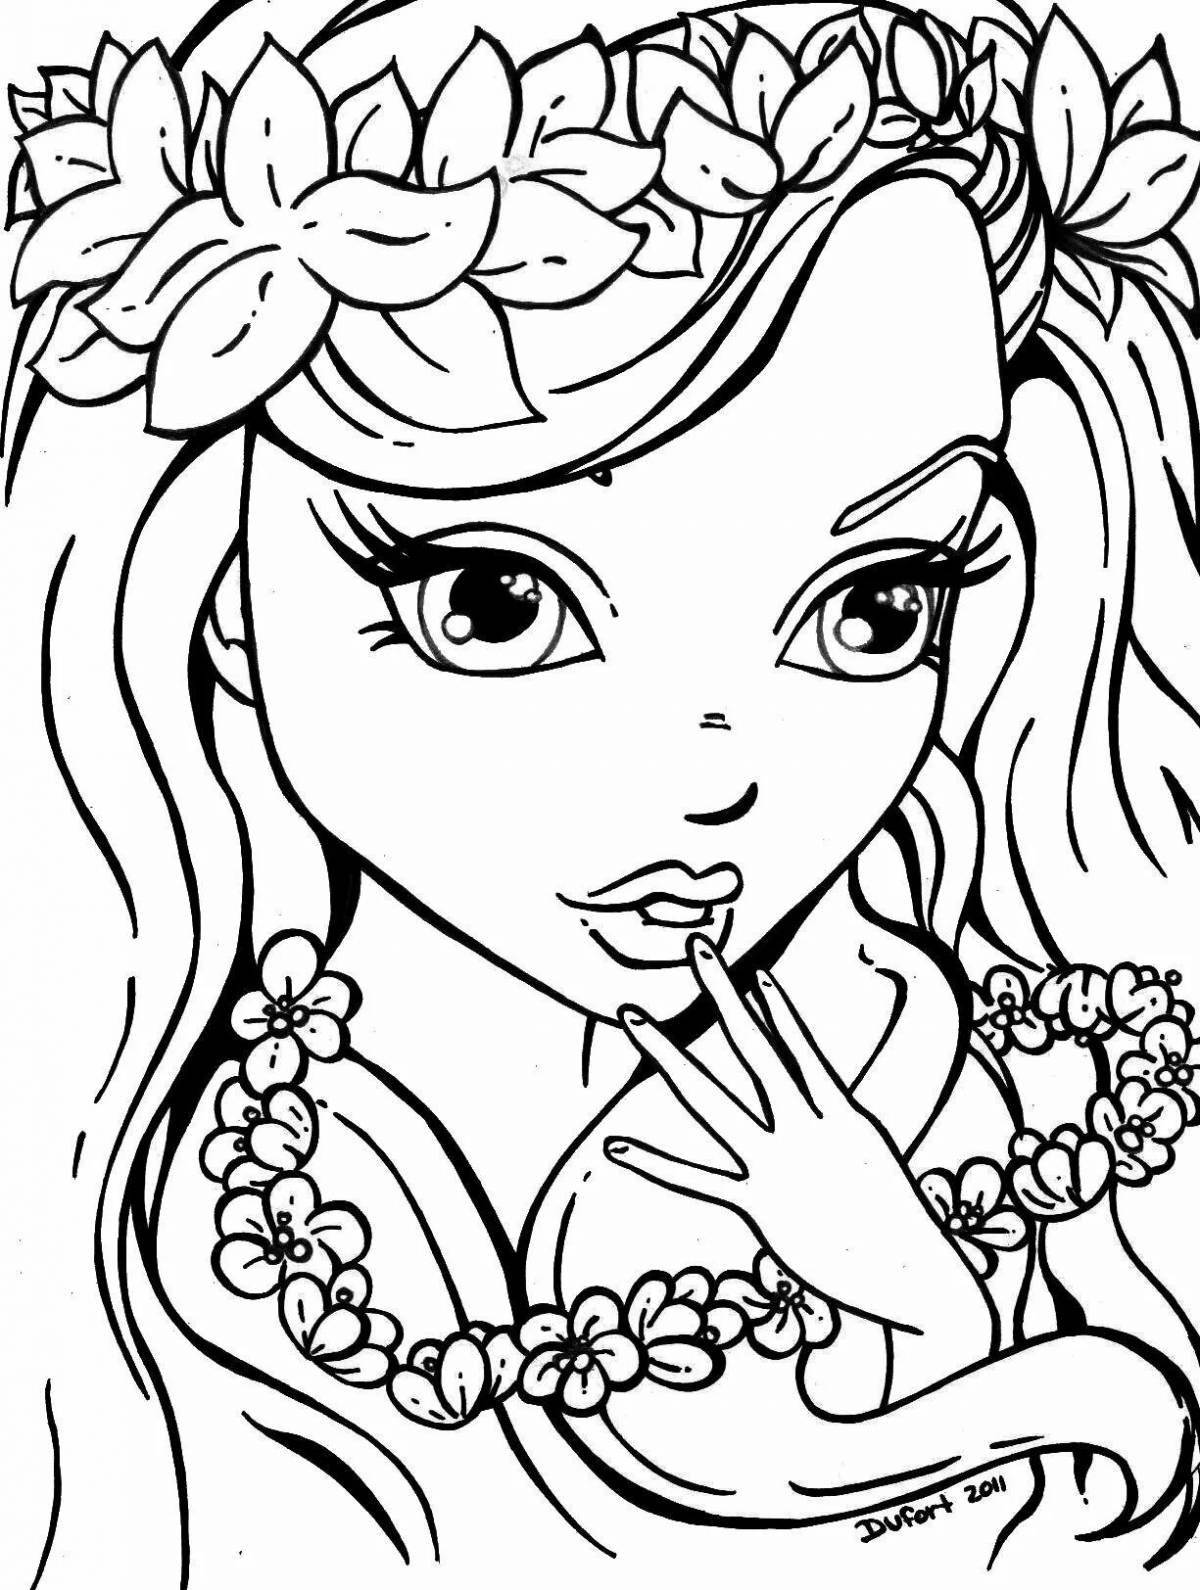 Radiant coloring page in e for girls